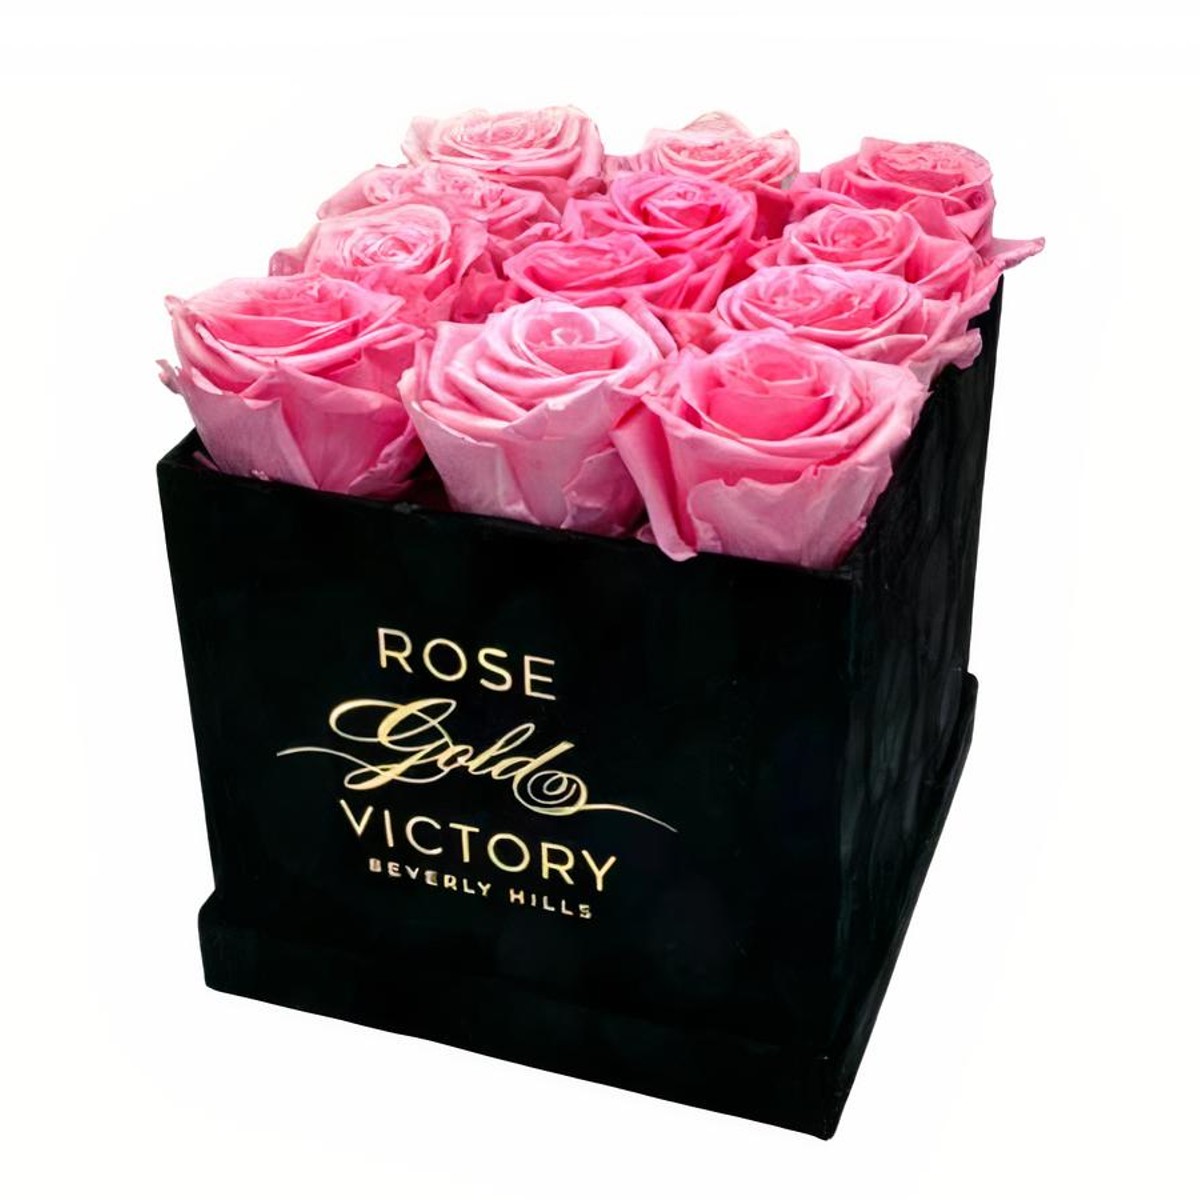 Rose Gold Victory (7259 Willoughby Avenue) Floral Delivery - DoorDash